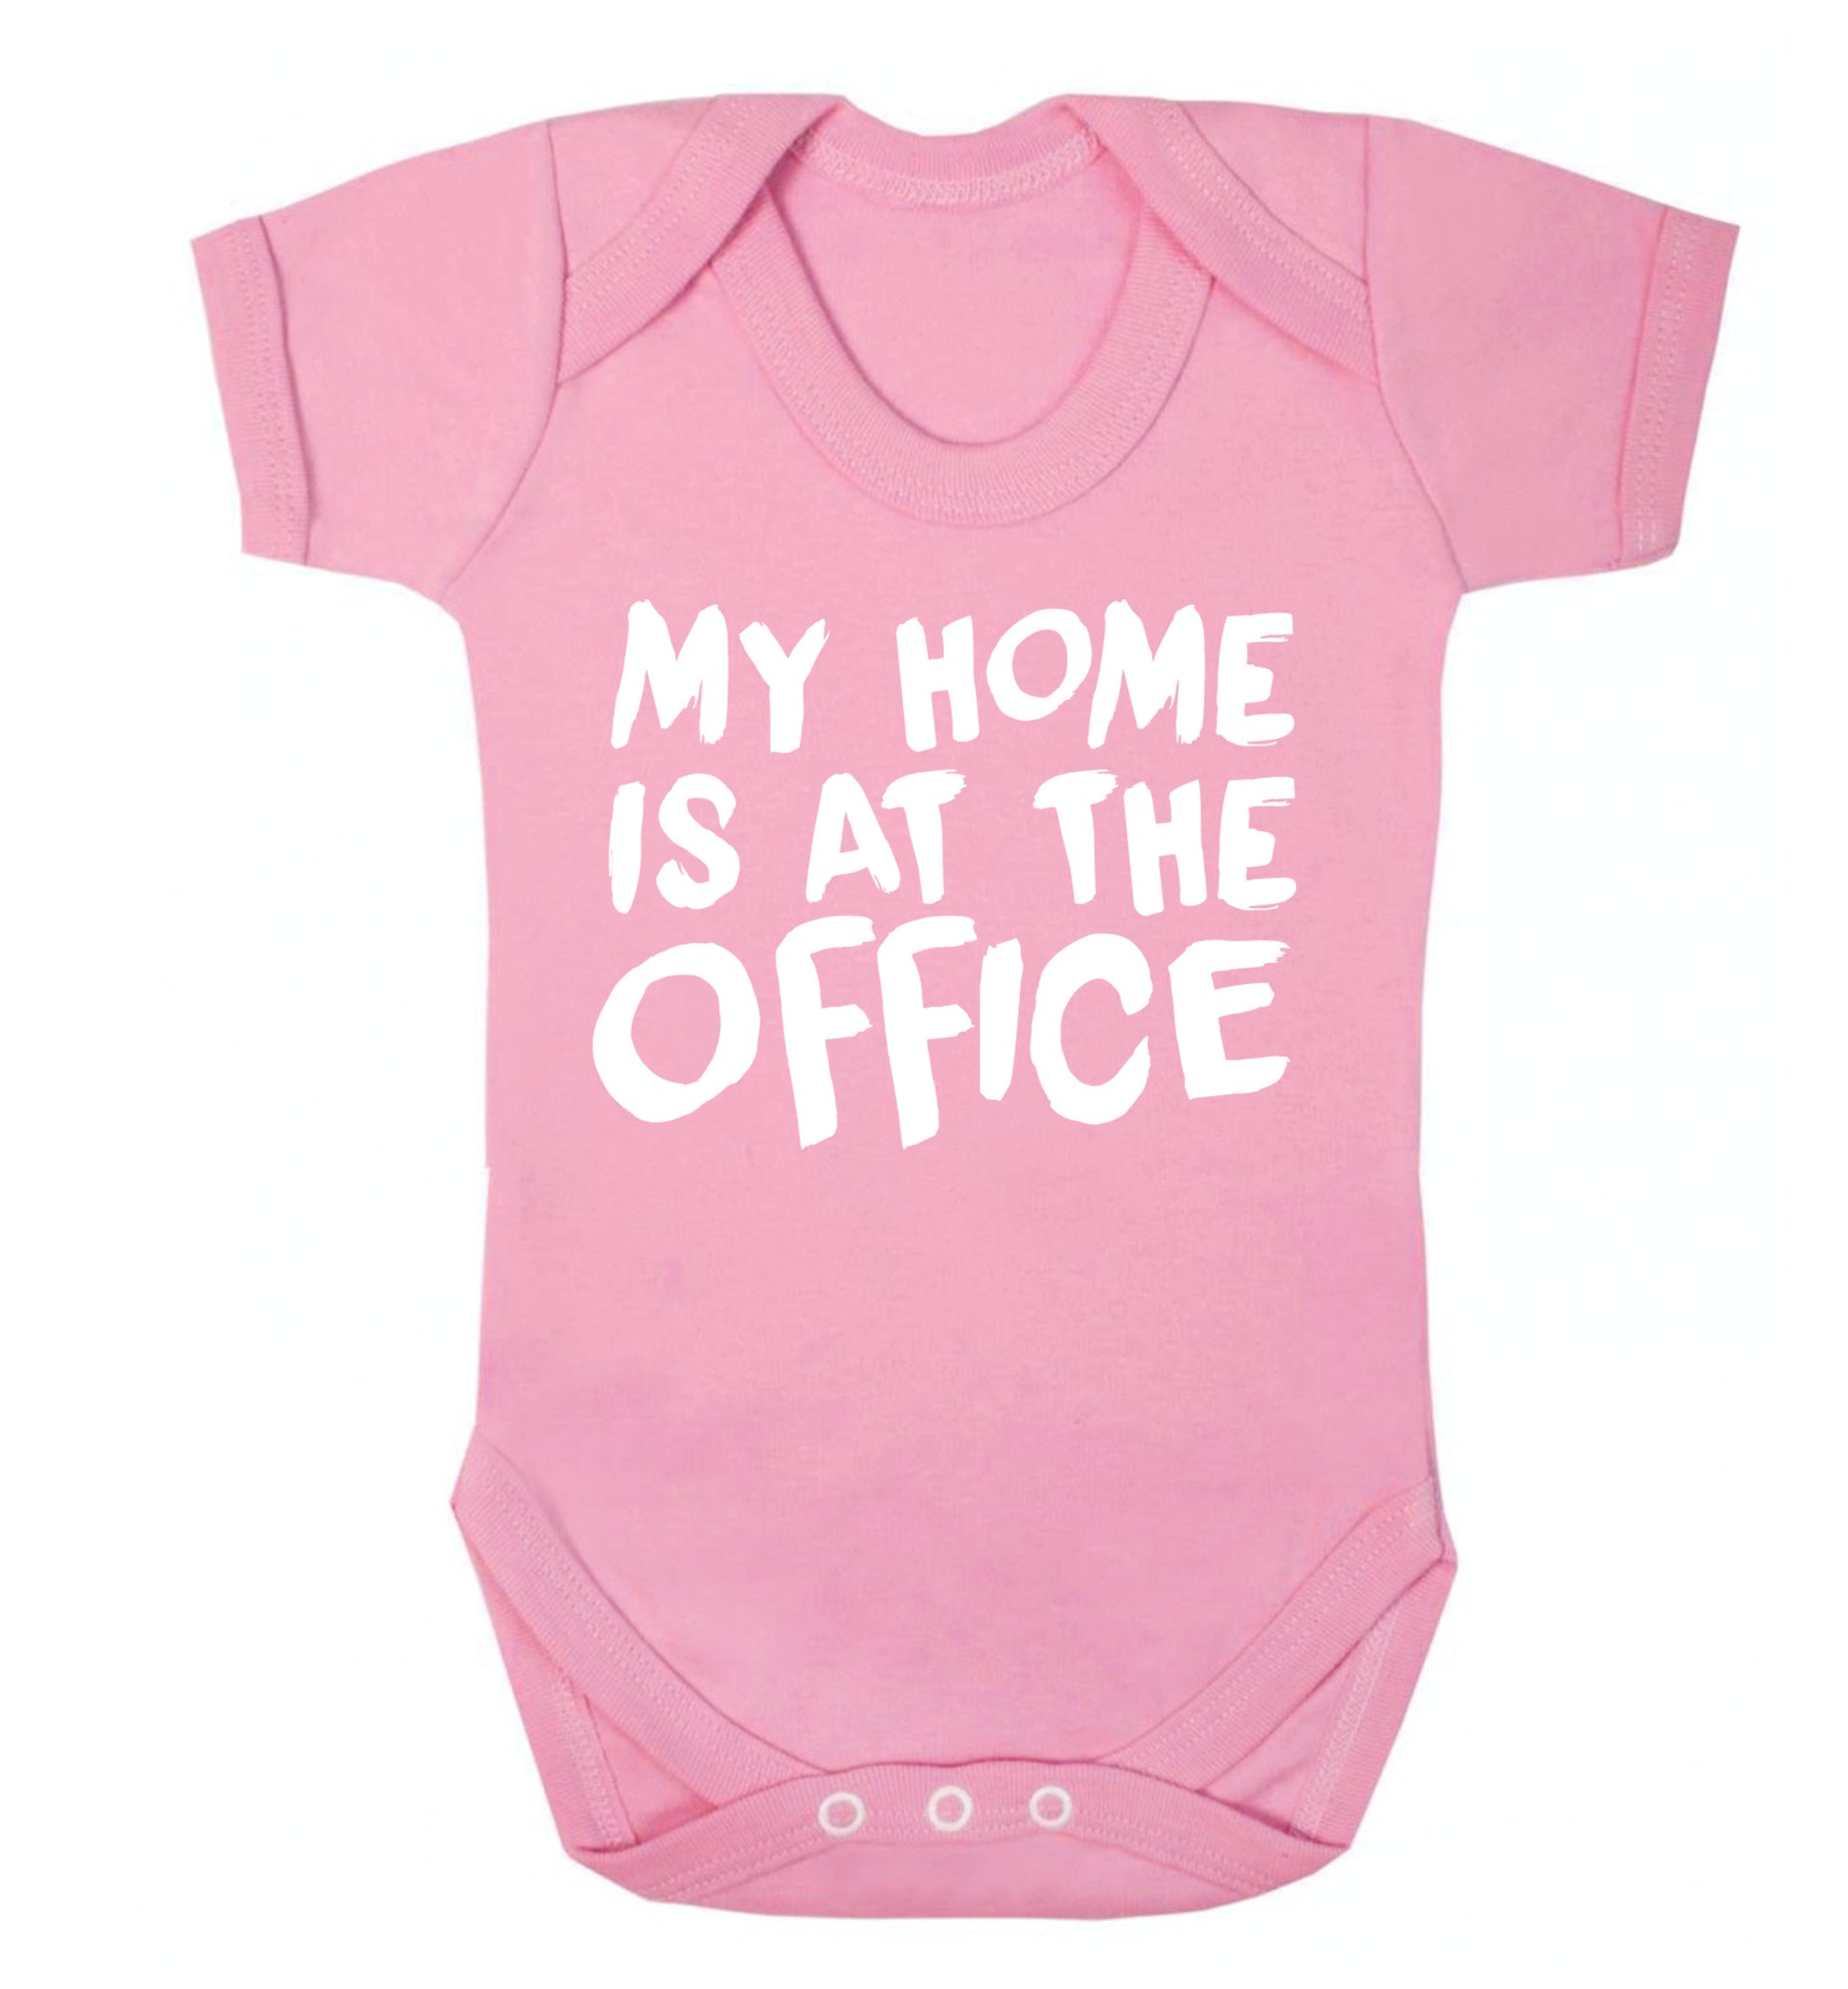 My home is at the office Baby Vest pale pink 18-24 months